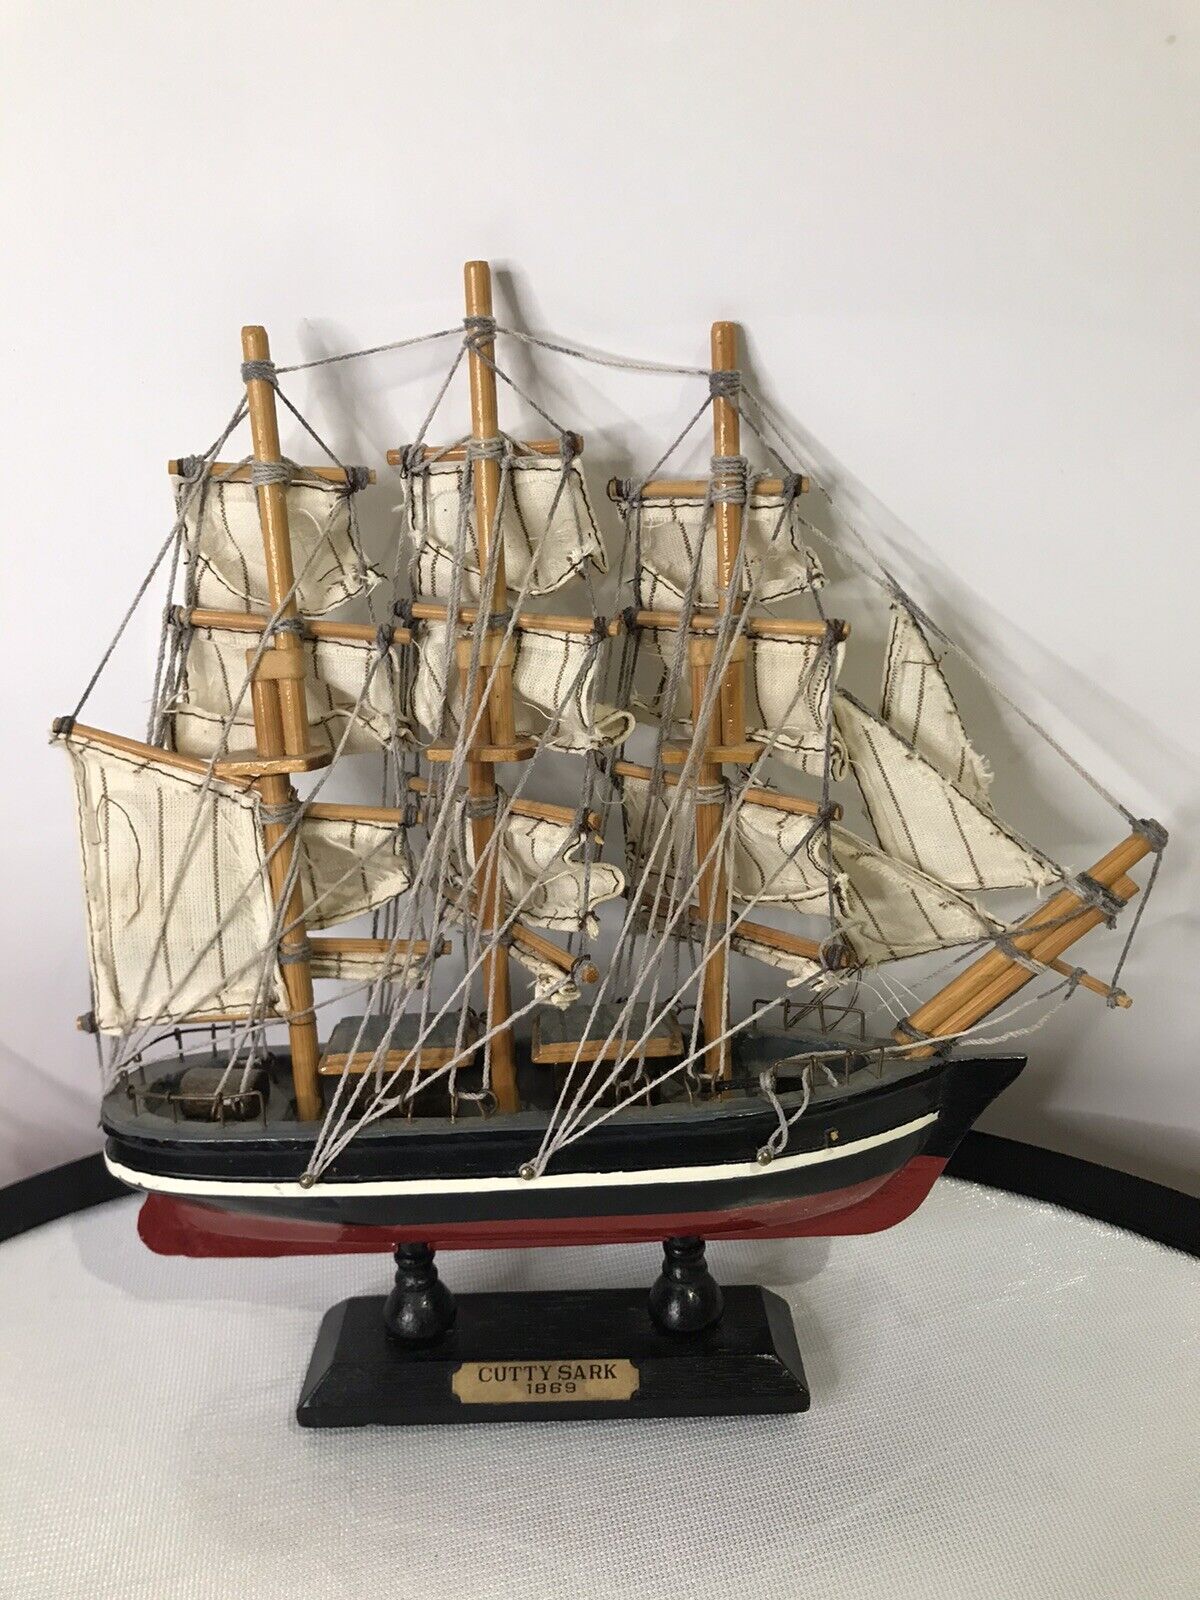 Cutty Sark model ship 1869 collectable figurine